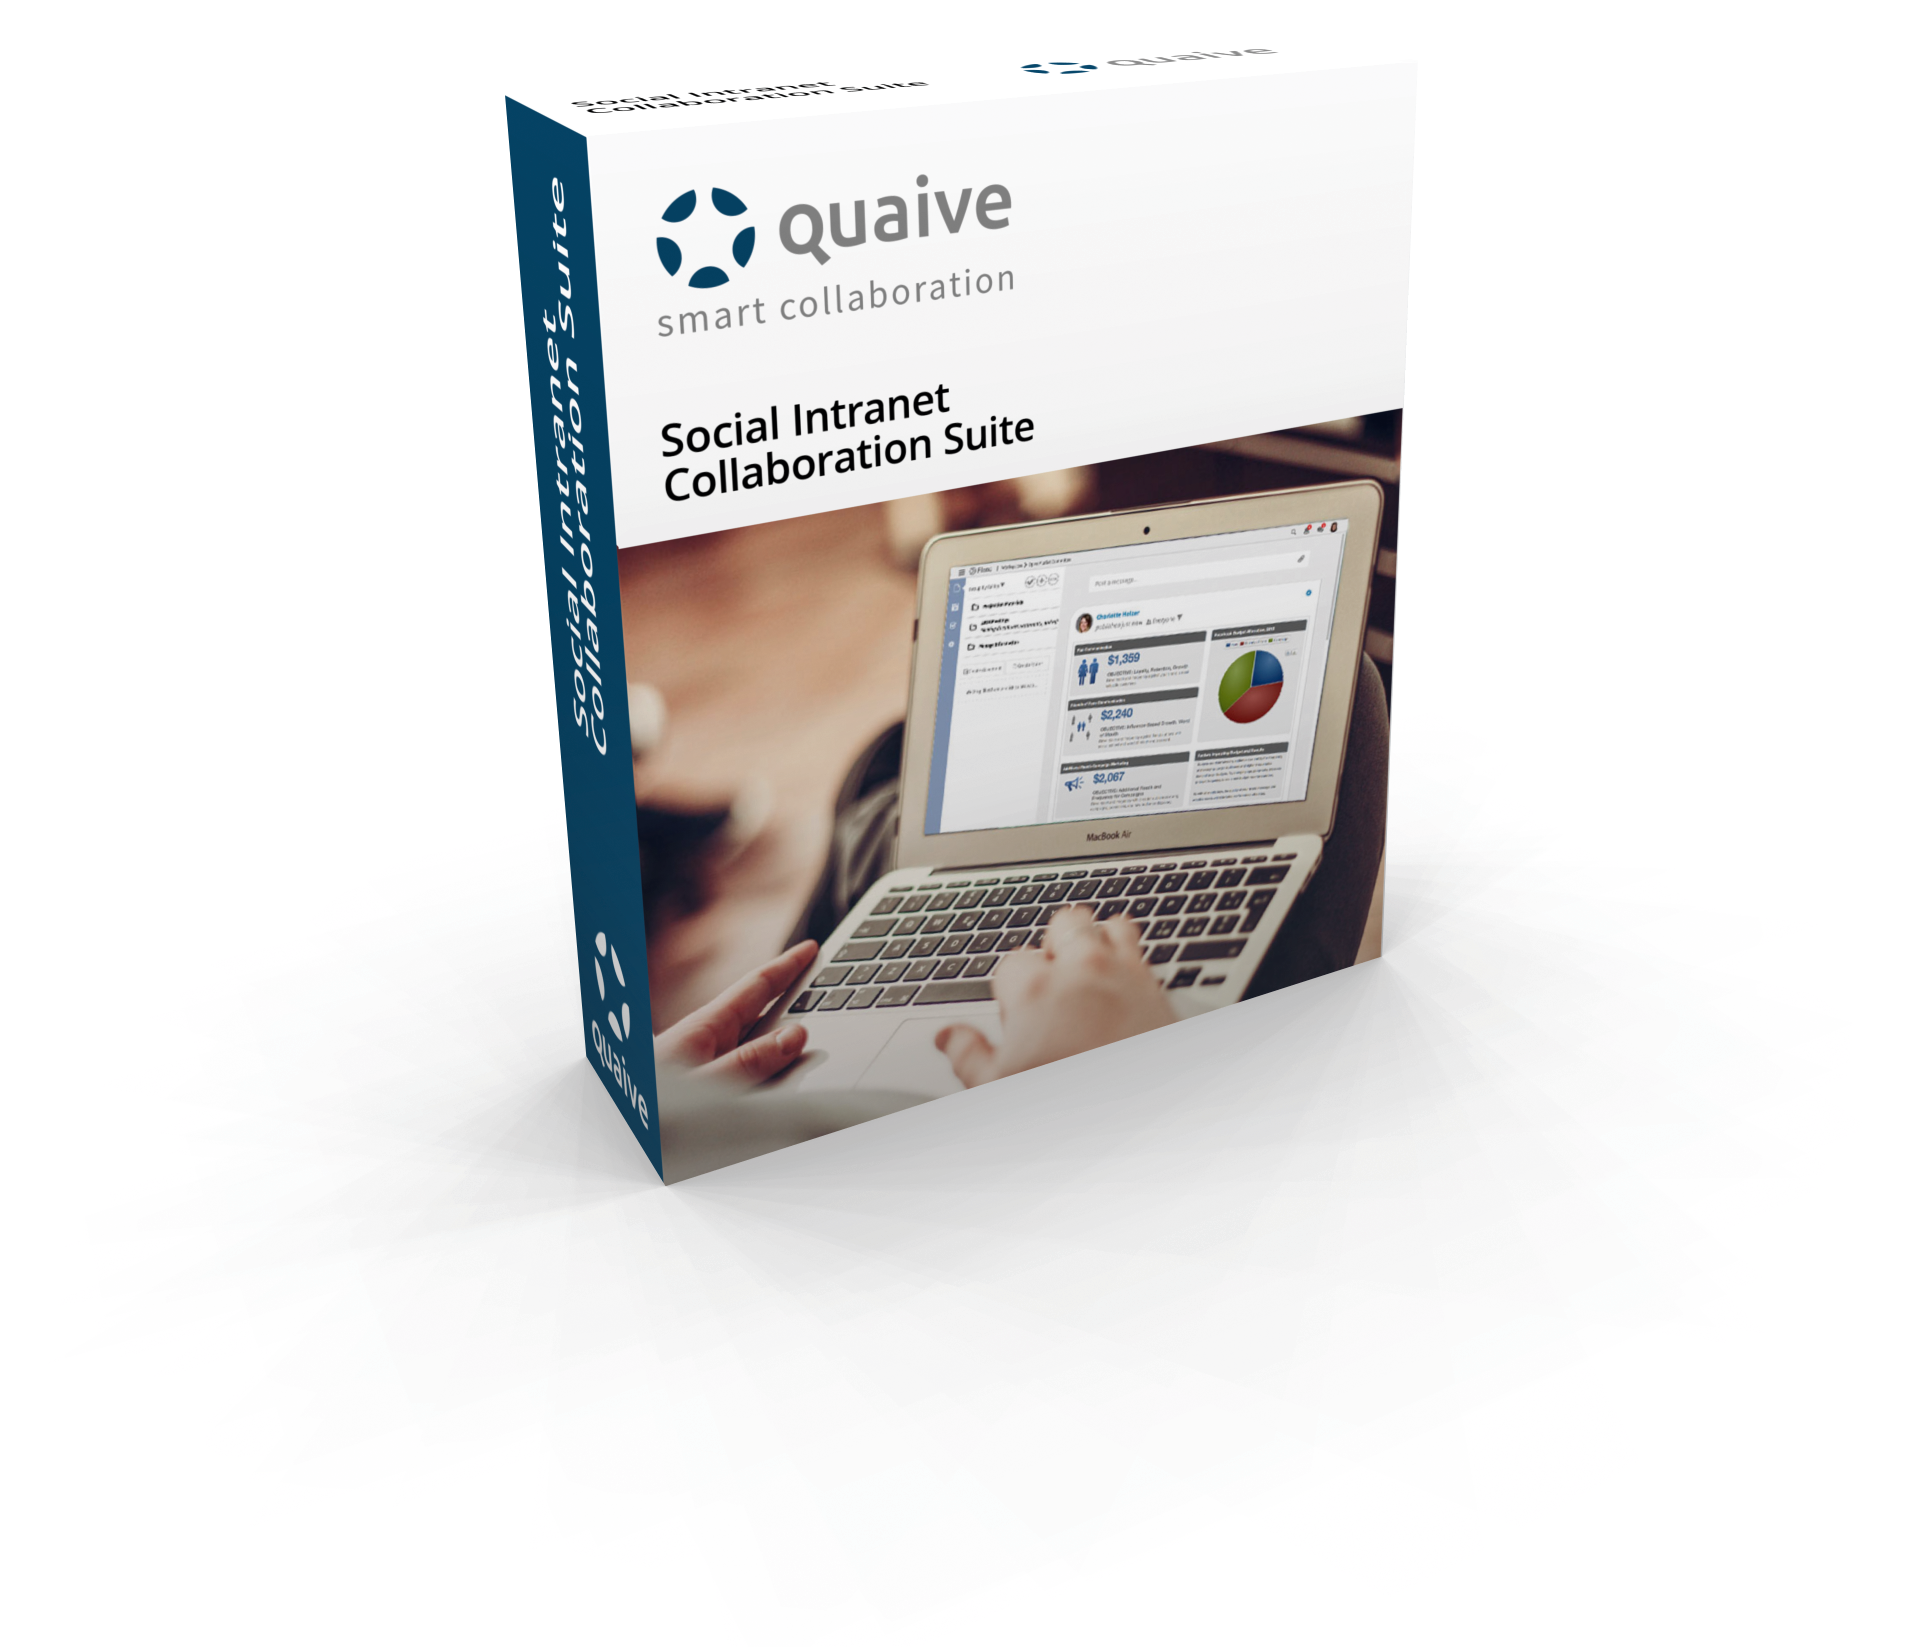 The Quaive Social Collaboration Platform based on Plone Intranet was released in December 2015